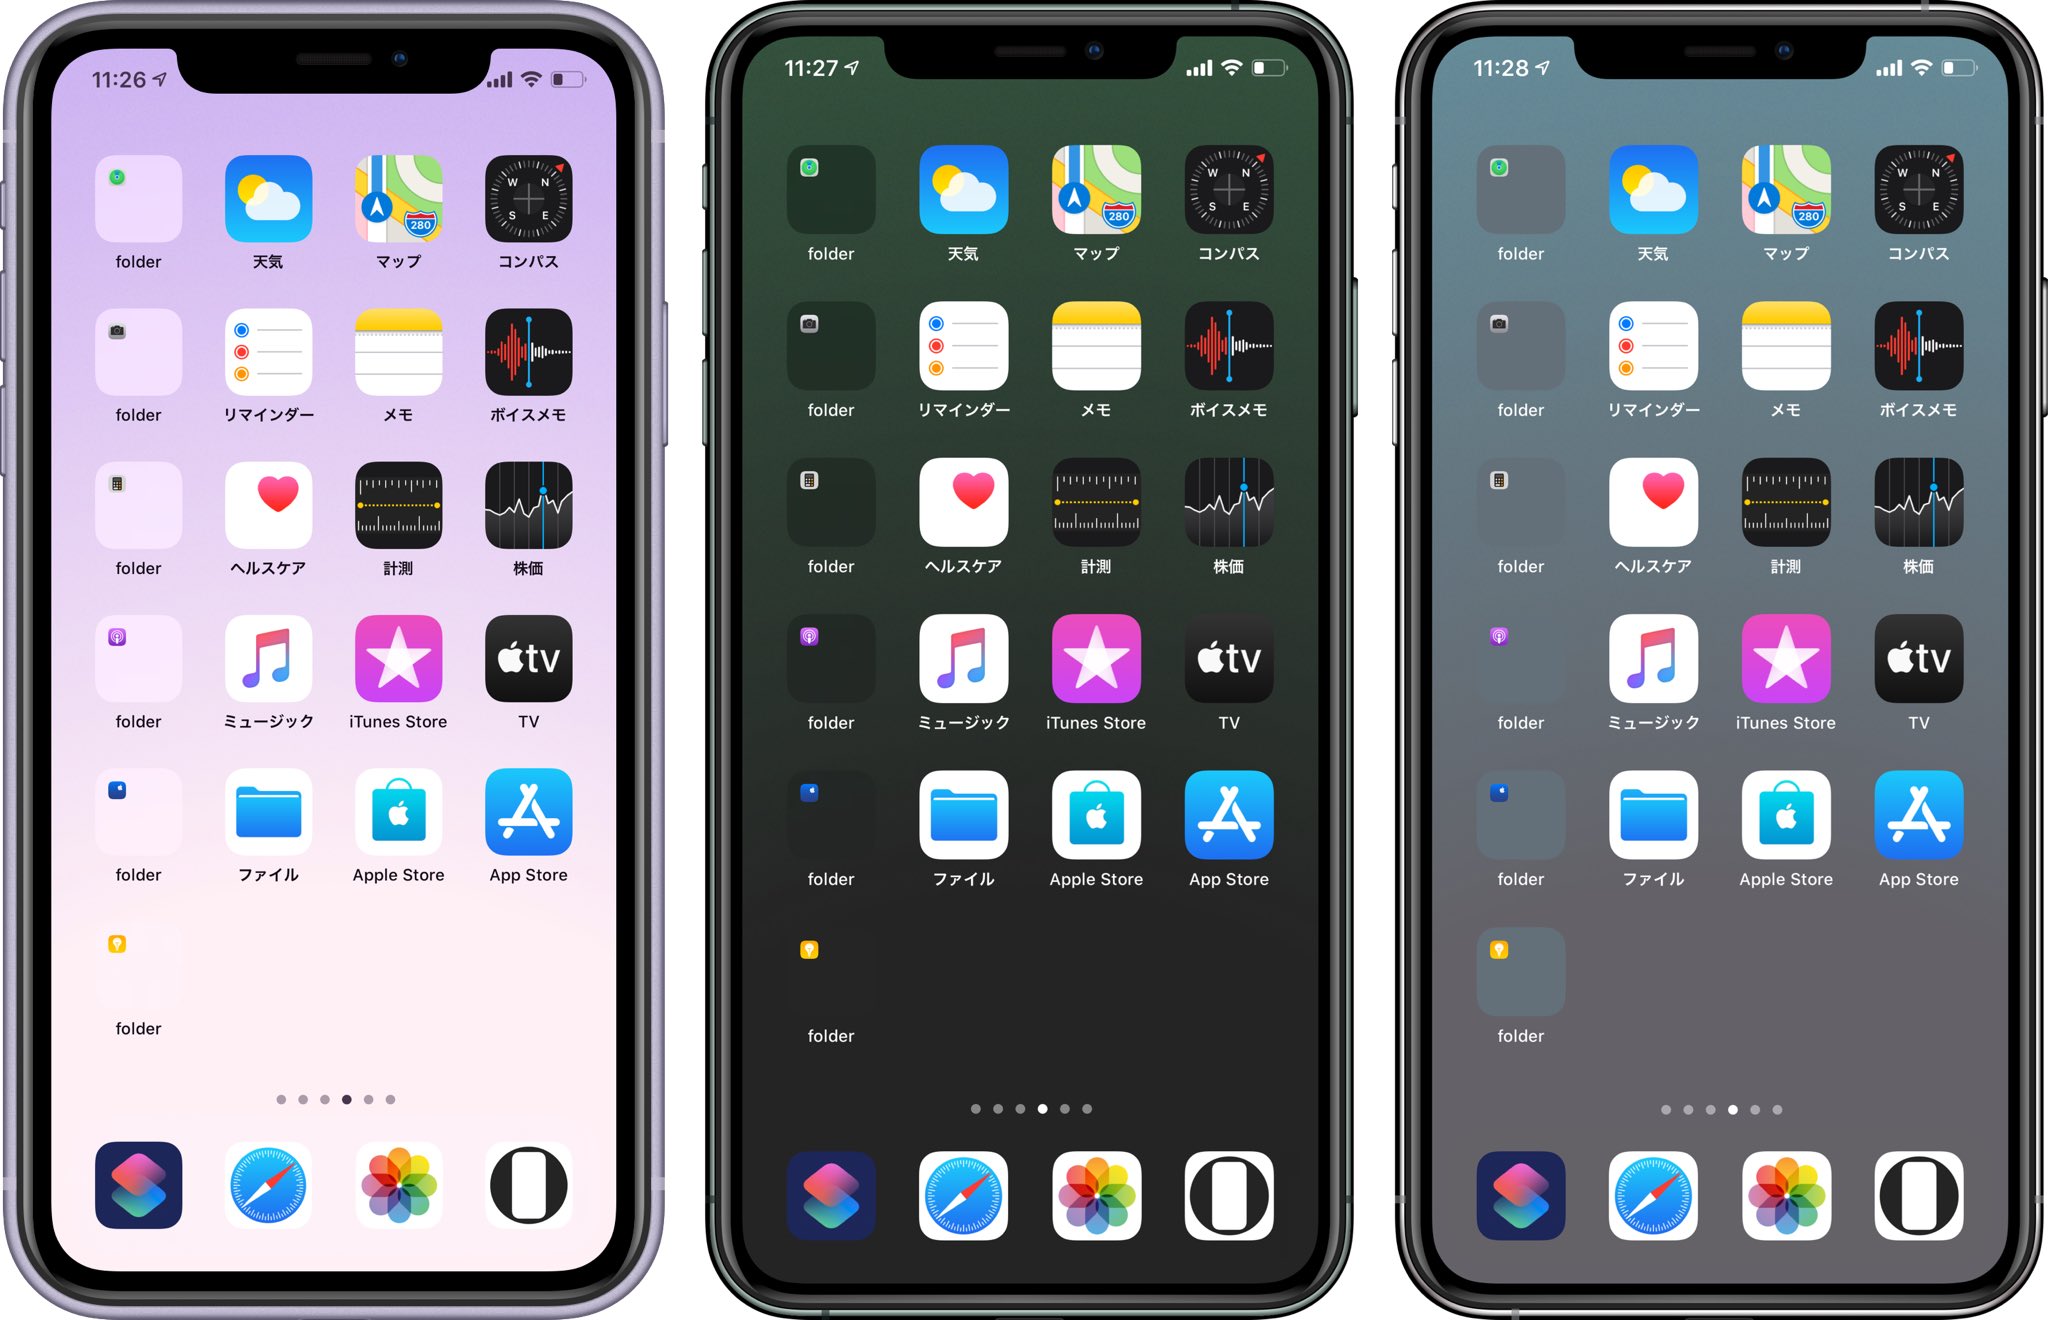 Hide Mysterious Iphone Wallpsper 不思議なiphone壁紙 Ios 13のiphone のドックを隠す繊細なグラデーションの壁紙各モード用各10枚 Wallpapers With Delicate Gradients That Hide The Ios 13 Iphone Dock 10 Sheets For Each Mode T Co